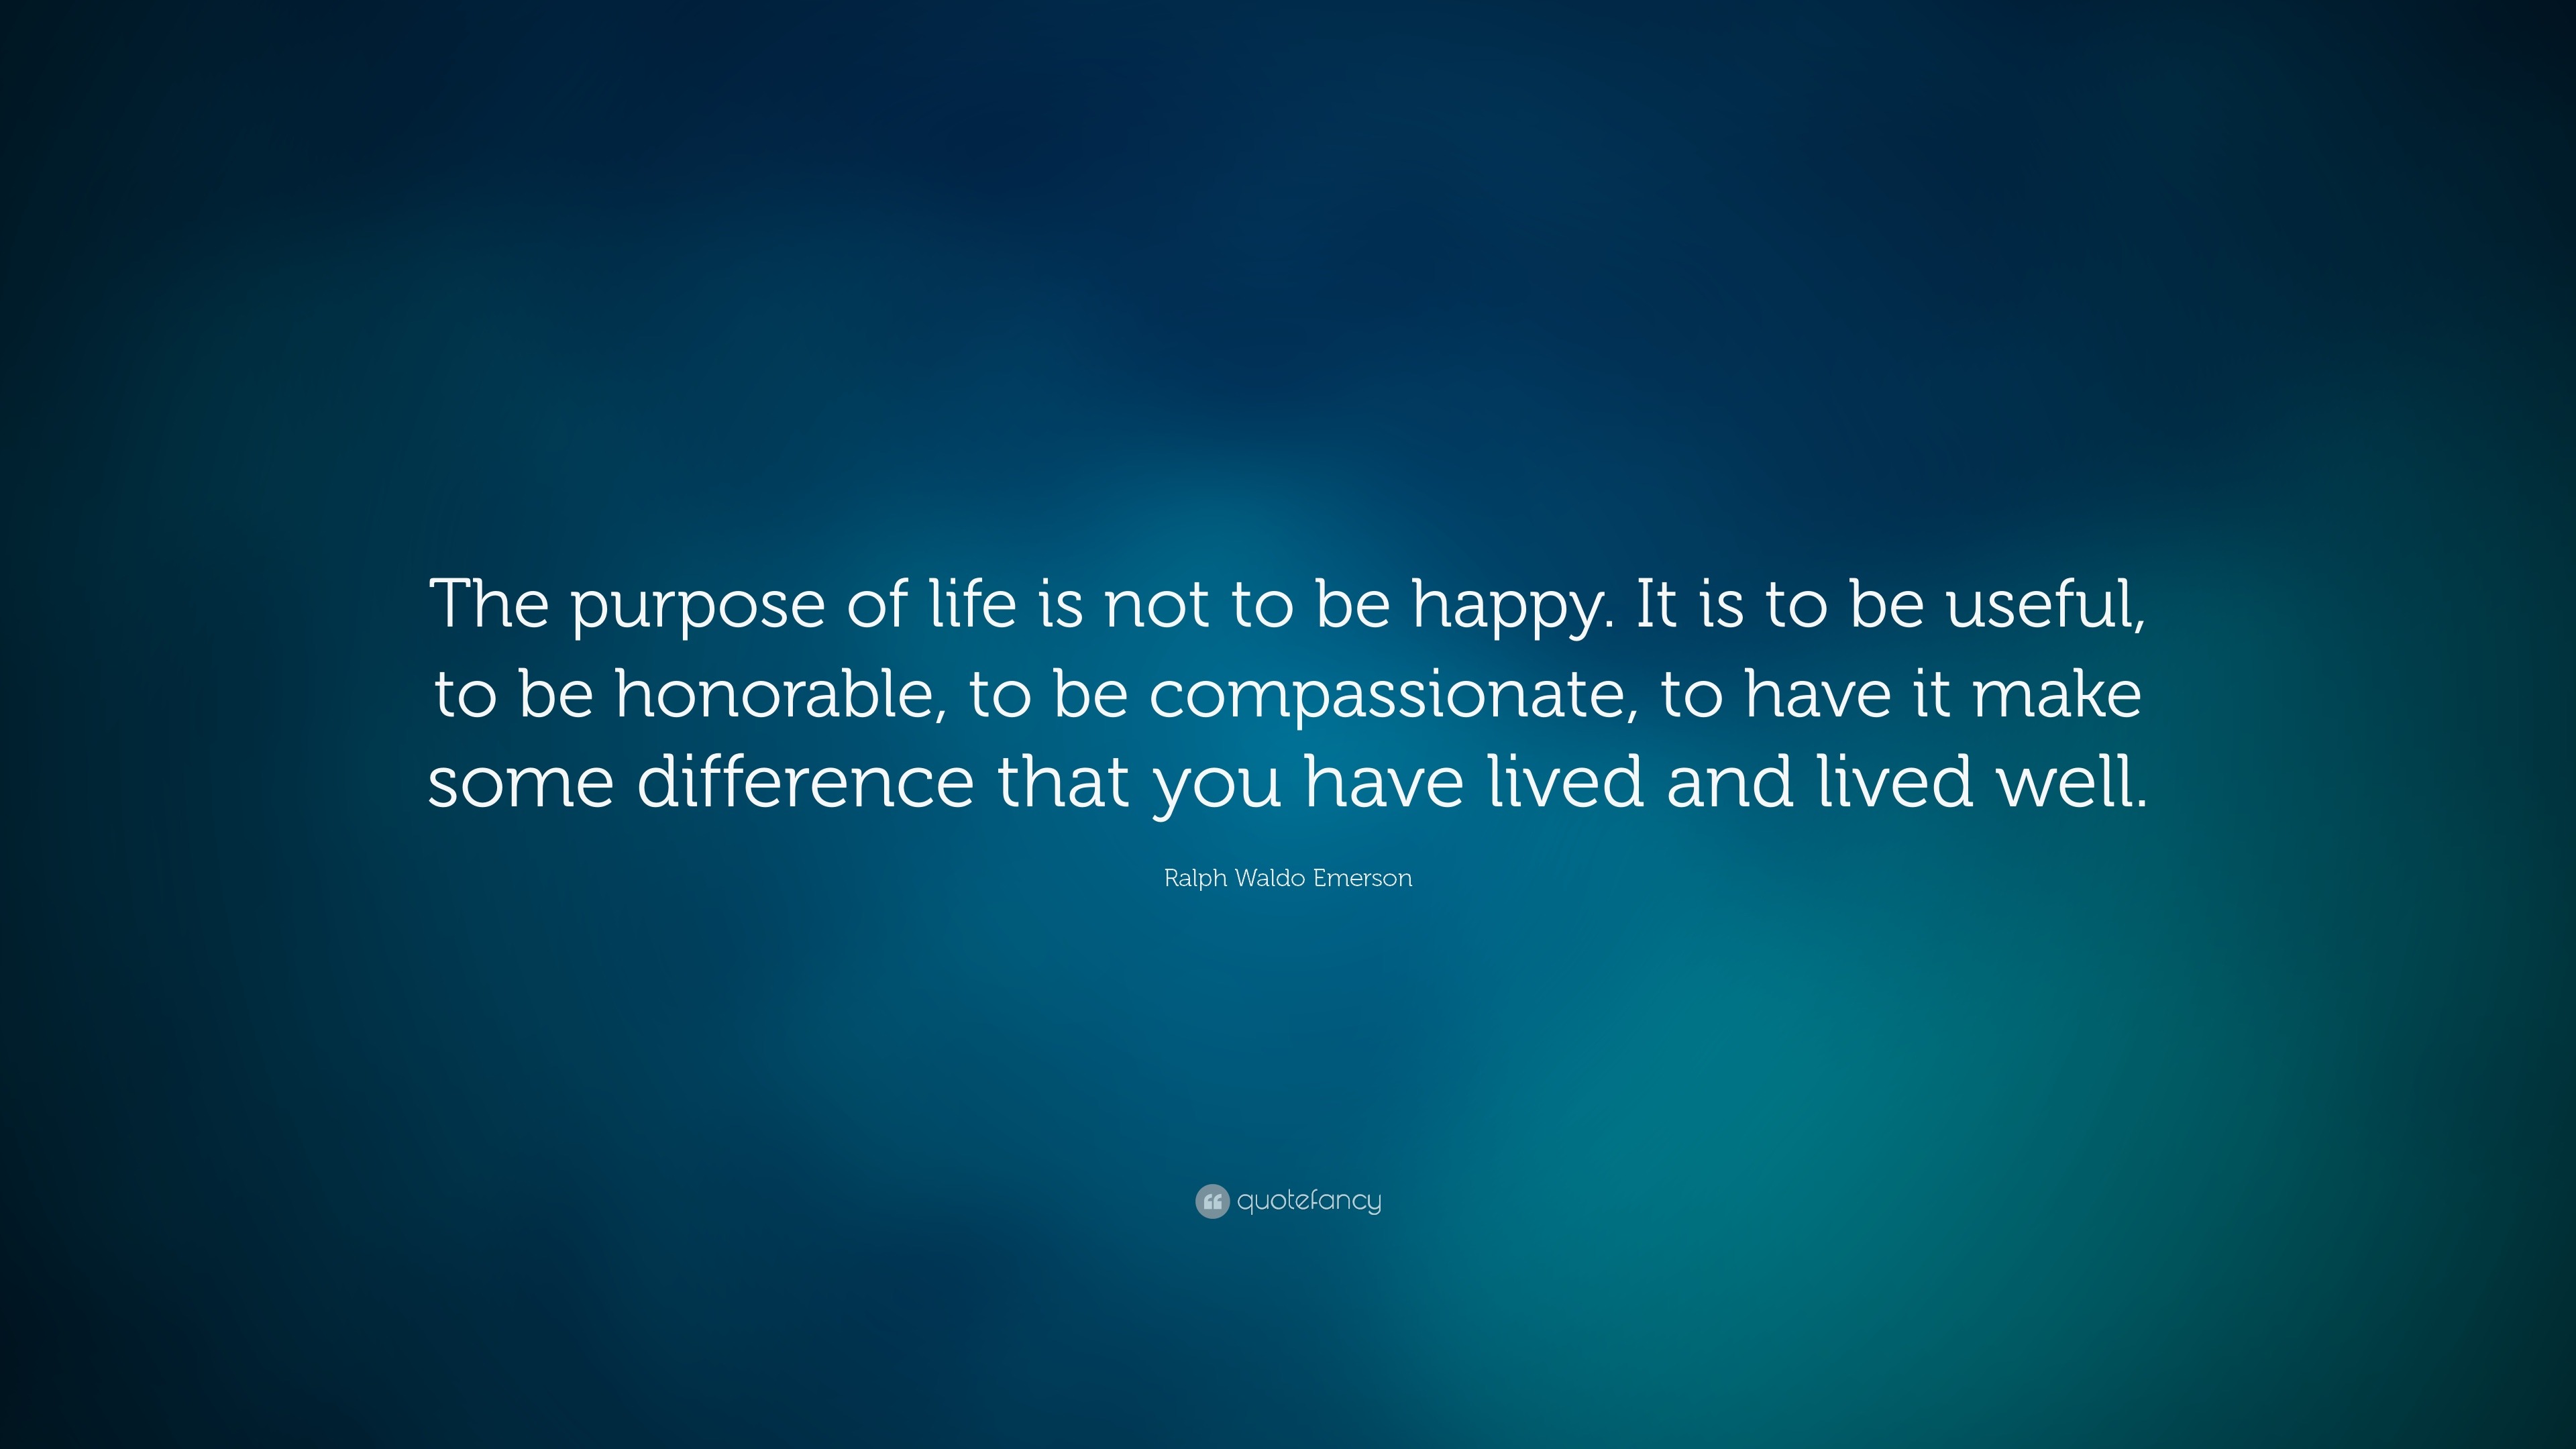 Ralph Waldo Emerson Quote: “The purpose of life is not to be happy. It